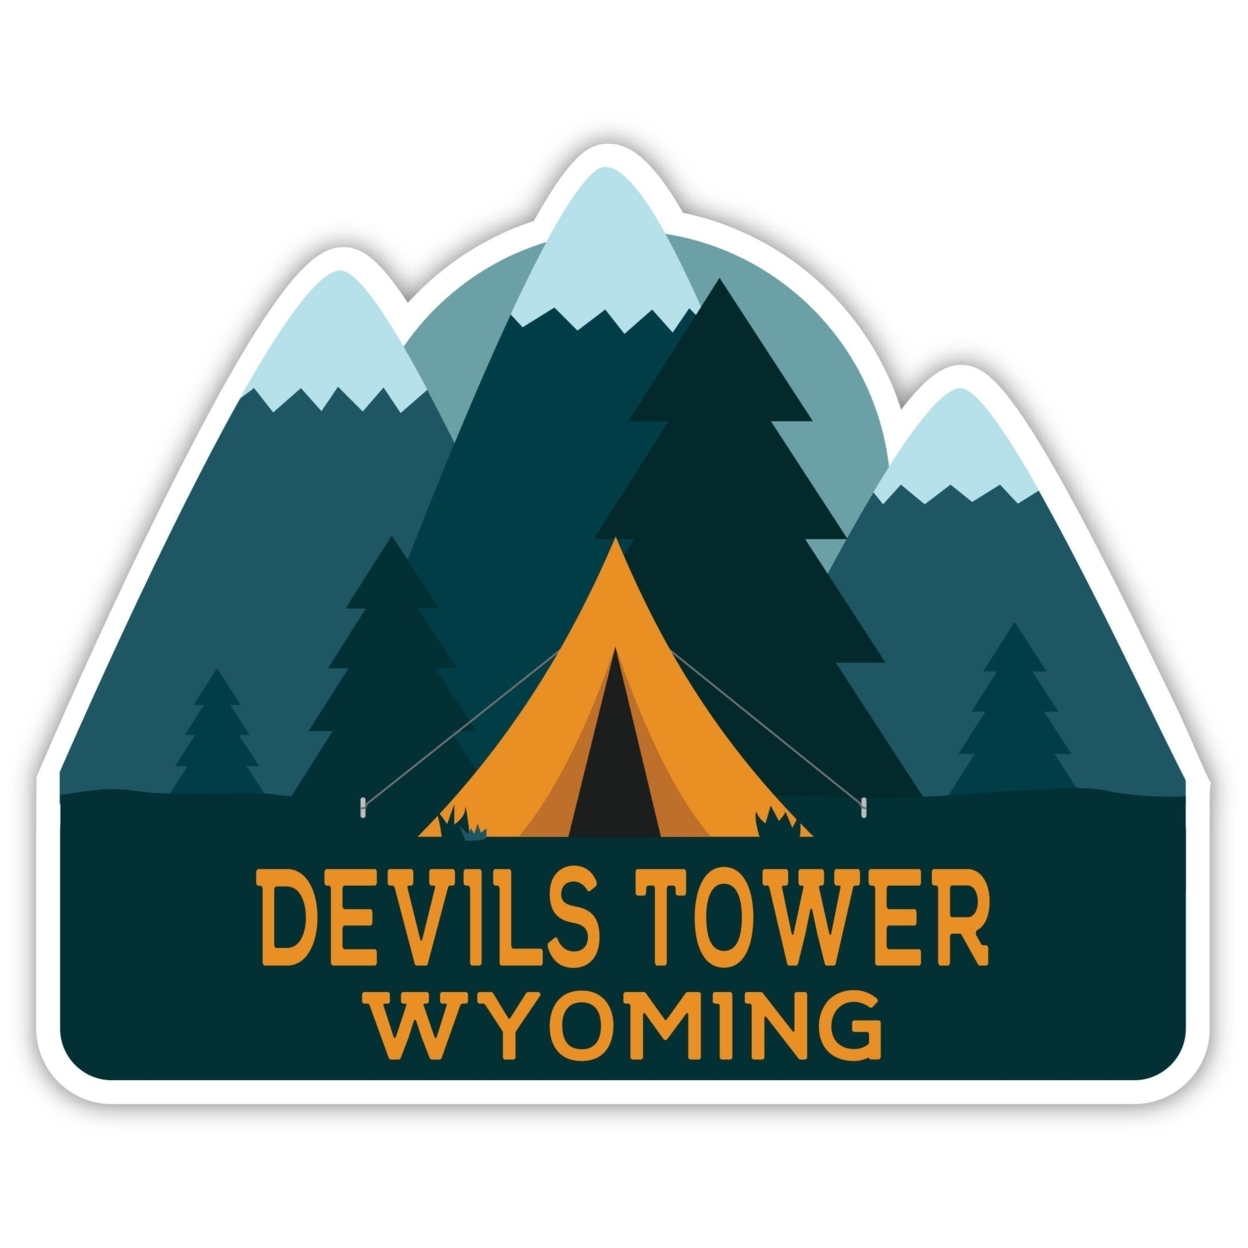 Devils Tower Wyoming Souvenir Decorative Stickers (Choose Theme And Size) - 4-Pack, 10-Inch, Bear